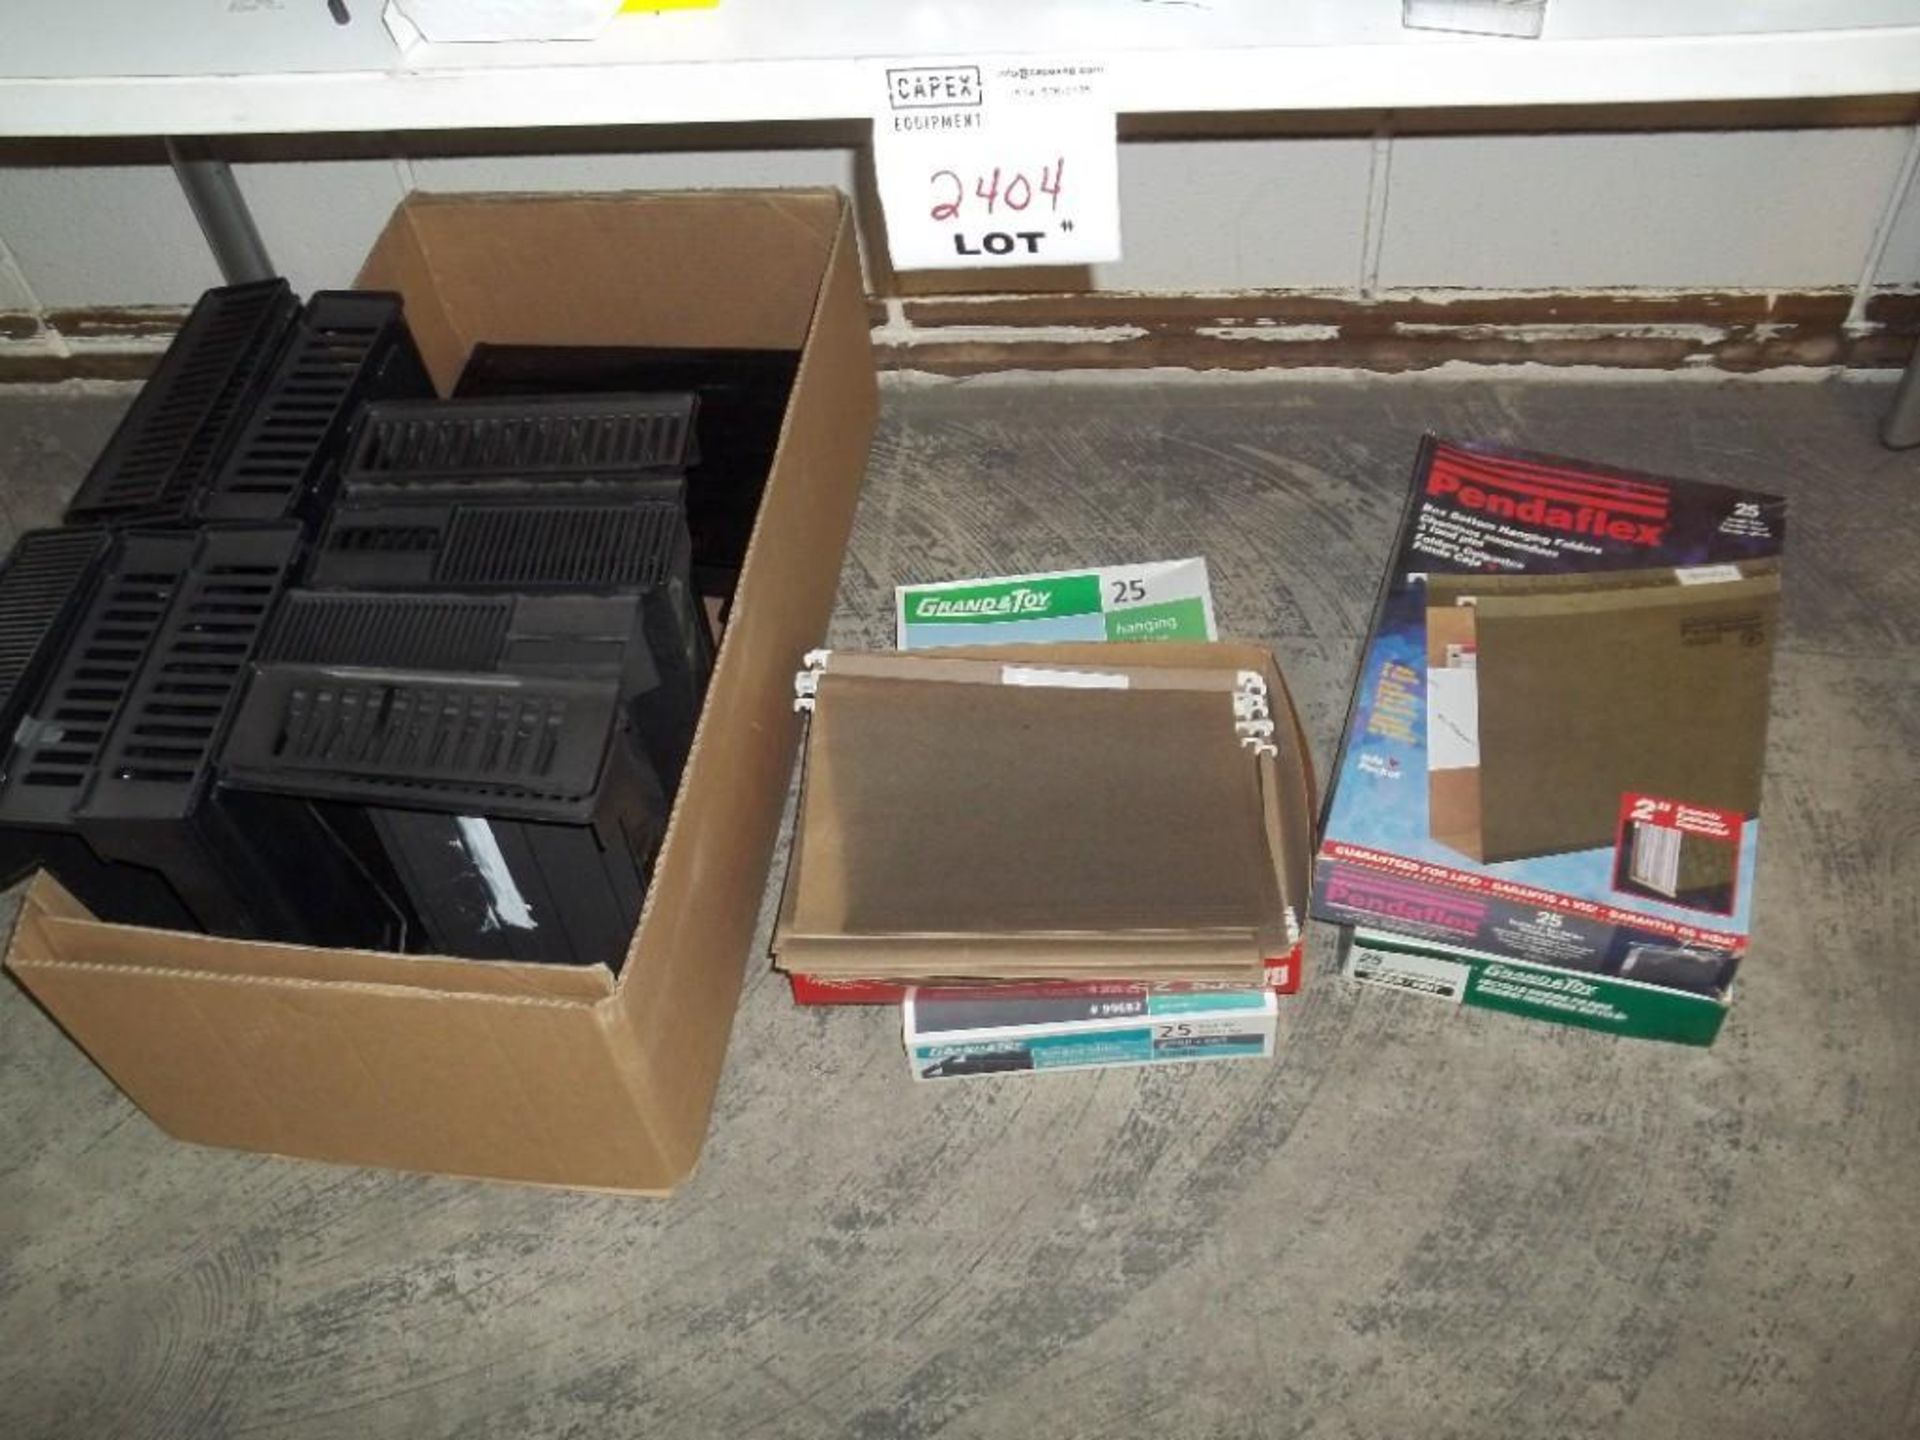 Large Lot Of Assorted Office Supplies Packed In Boxes - Image 5 of 5